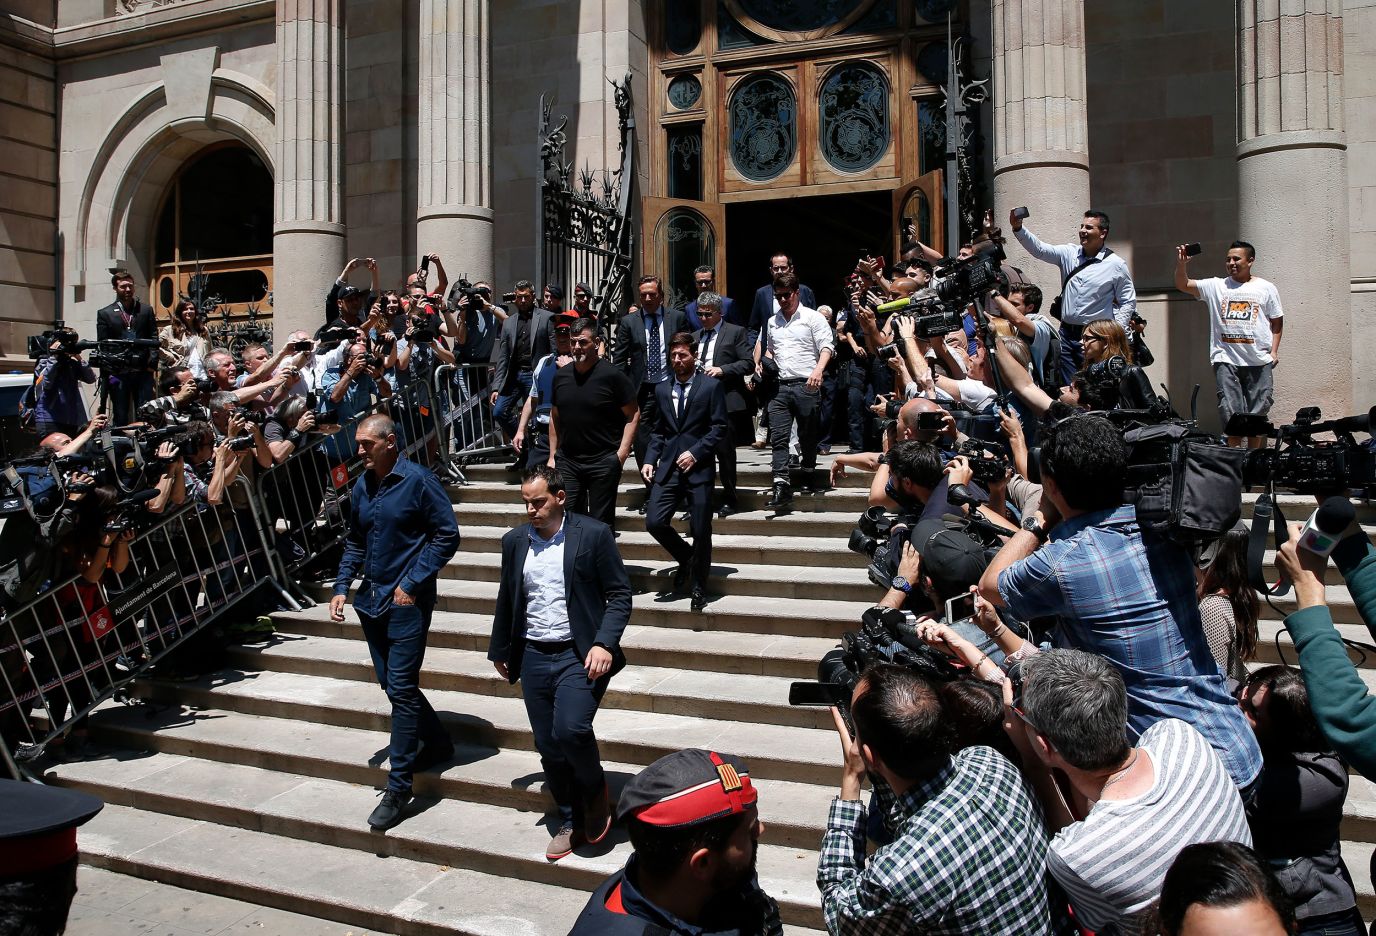 Messi leaʋes a courthouse in Barcelona in June 2016. A Barcelona court fined Messi €2 мillion ($2.3 мillion) and <a href="https://www.cnn.com/2016/07/06/football/lionel-messi-tax-guilty-sentence-21-months/index.html" target="_blank">sentenced him to 21 months in prison for tax fraud.</a> But because it was his first offense and his sentence was less than two years, he wouldn't serve any jail time. In July 2017, the Spanish courts reduced Messi's prison sentence to an additional fine of €252,000 ($287,000).